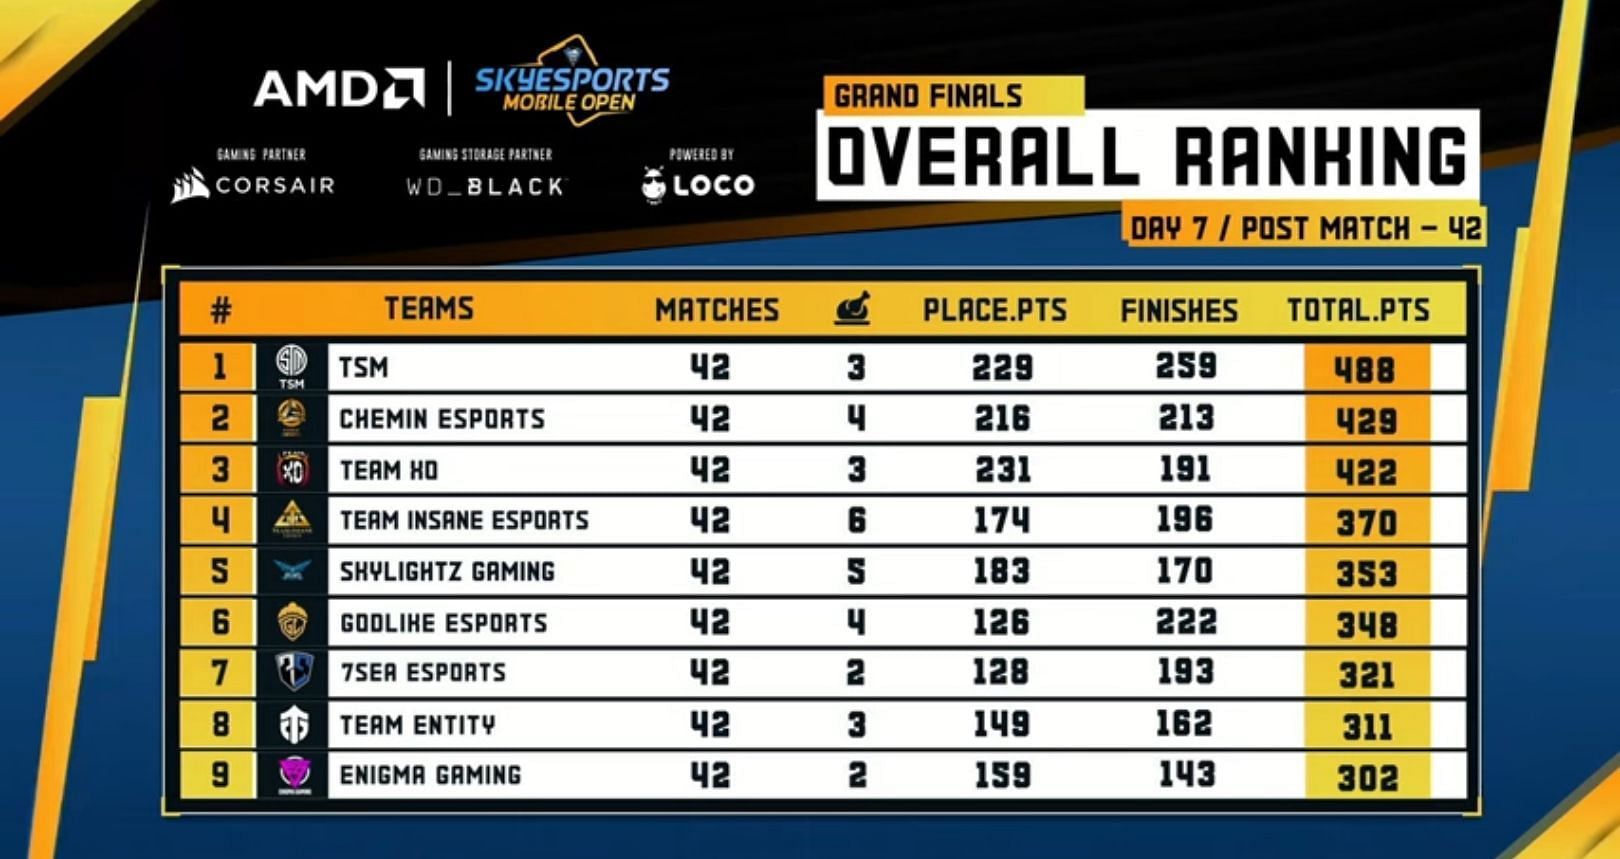 Top ten at the Skyesports Mobile Open BGMI (Image via Skyesports)